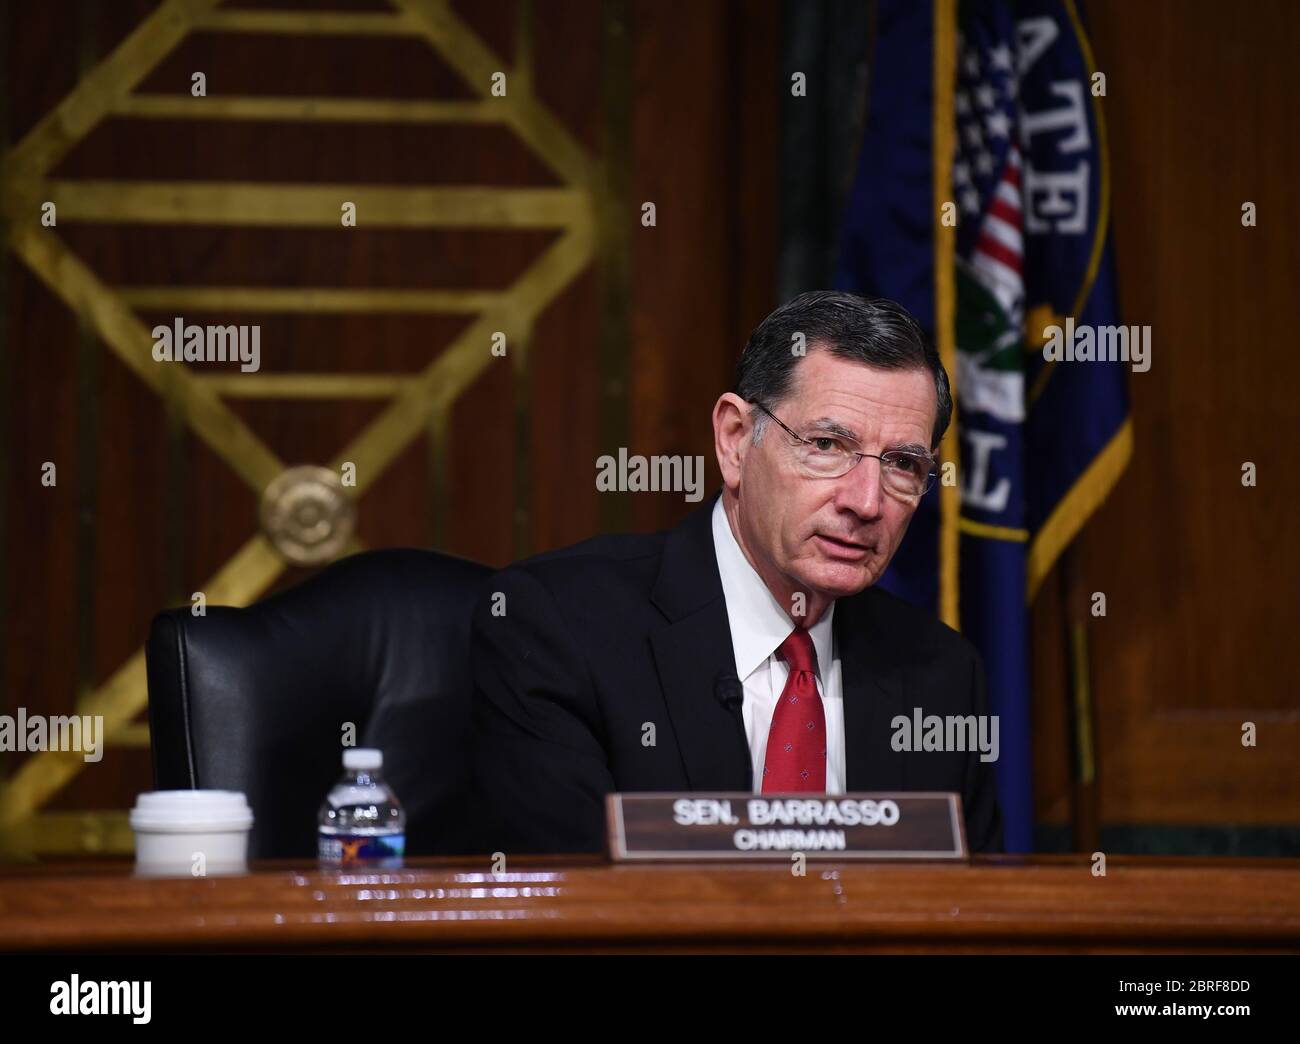 United States Senator John Barrasso (Republican of Wyoming) listens to opening remarks at a hearing titled 'Oversight of the Environmental Protection Agency' in the Dirksen Senate Office Building on May 20, 2020 in Washington, DC. Andrew Wheeler, Administrator, United States Environmental Protection Agency (EPA) will be asked about the rollback of regulations by the Environment Protection Agency since the pandemic started in March. Credit: Kevin Dietsch/Pool via CNP /MediaPunch Stock Photo